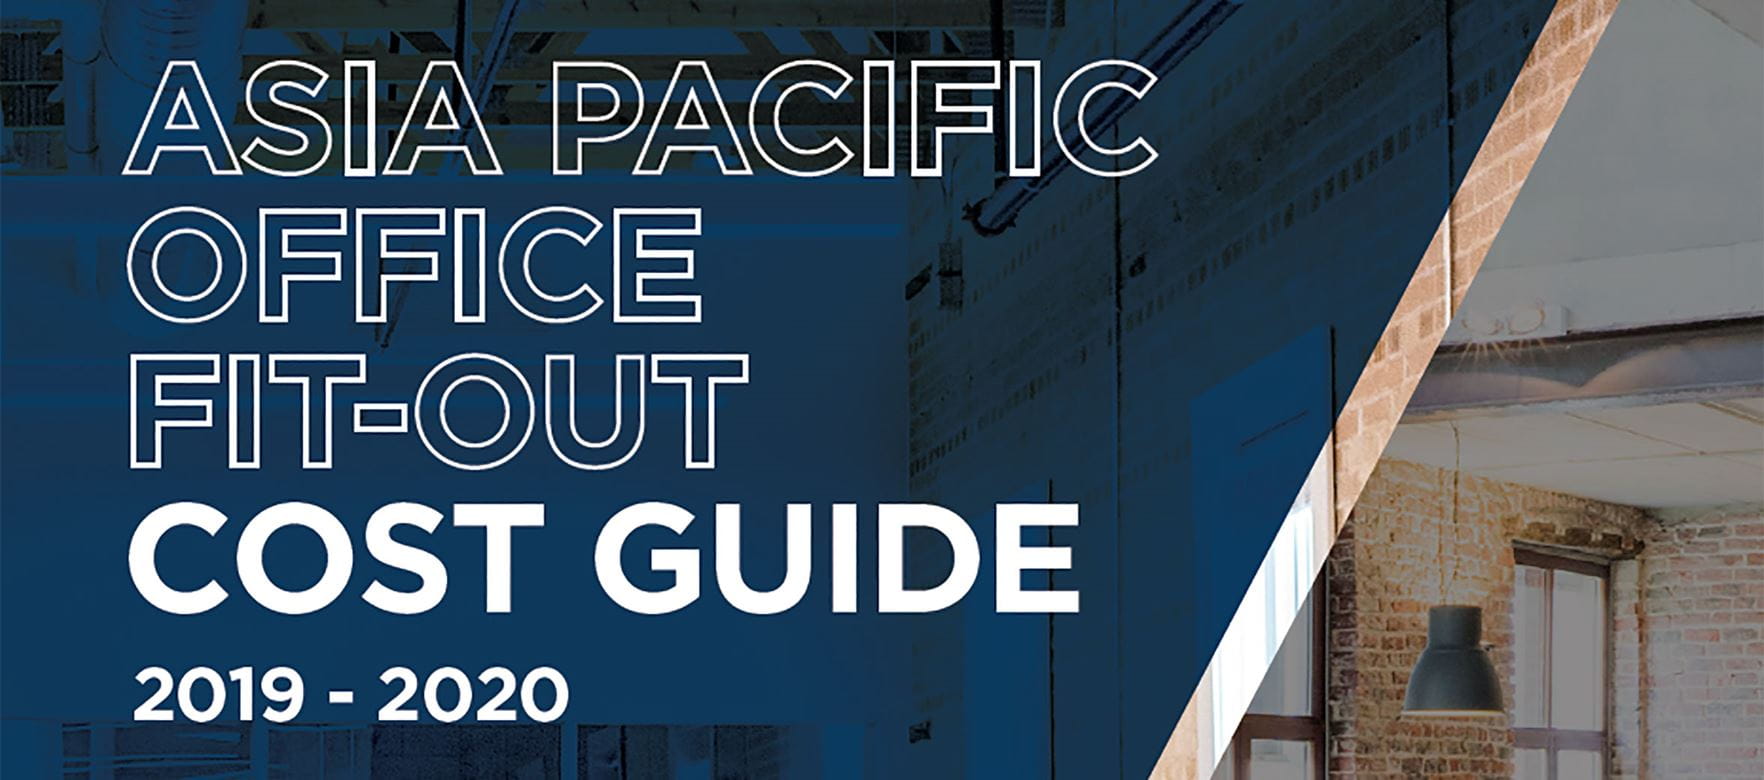 Get The Most From Your Asia Pacific Office Fit-out